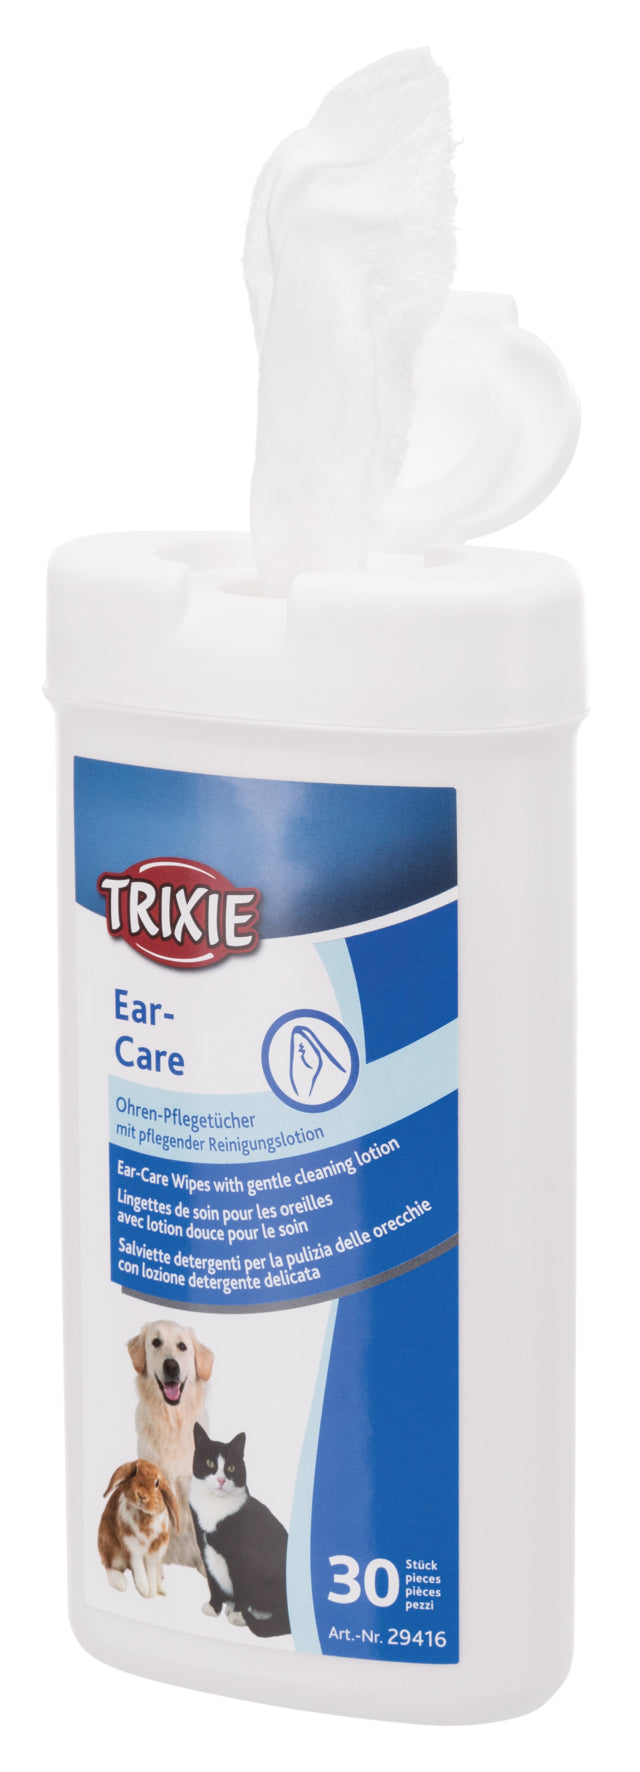 Trixie Ear Care Wipes - Pack of 2 - abkgrooming